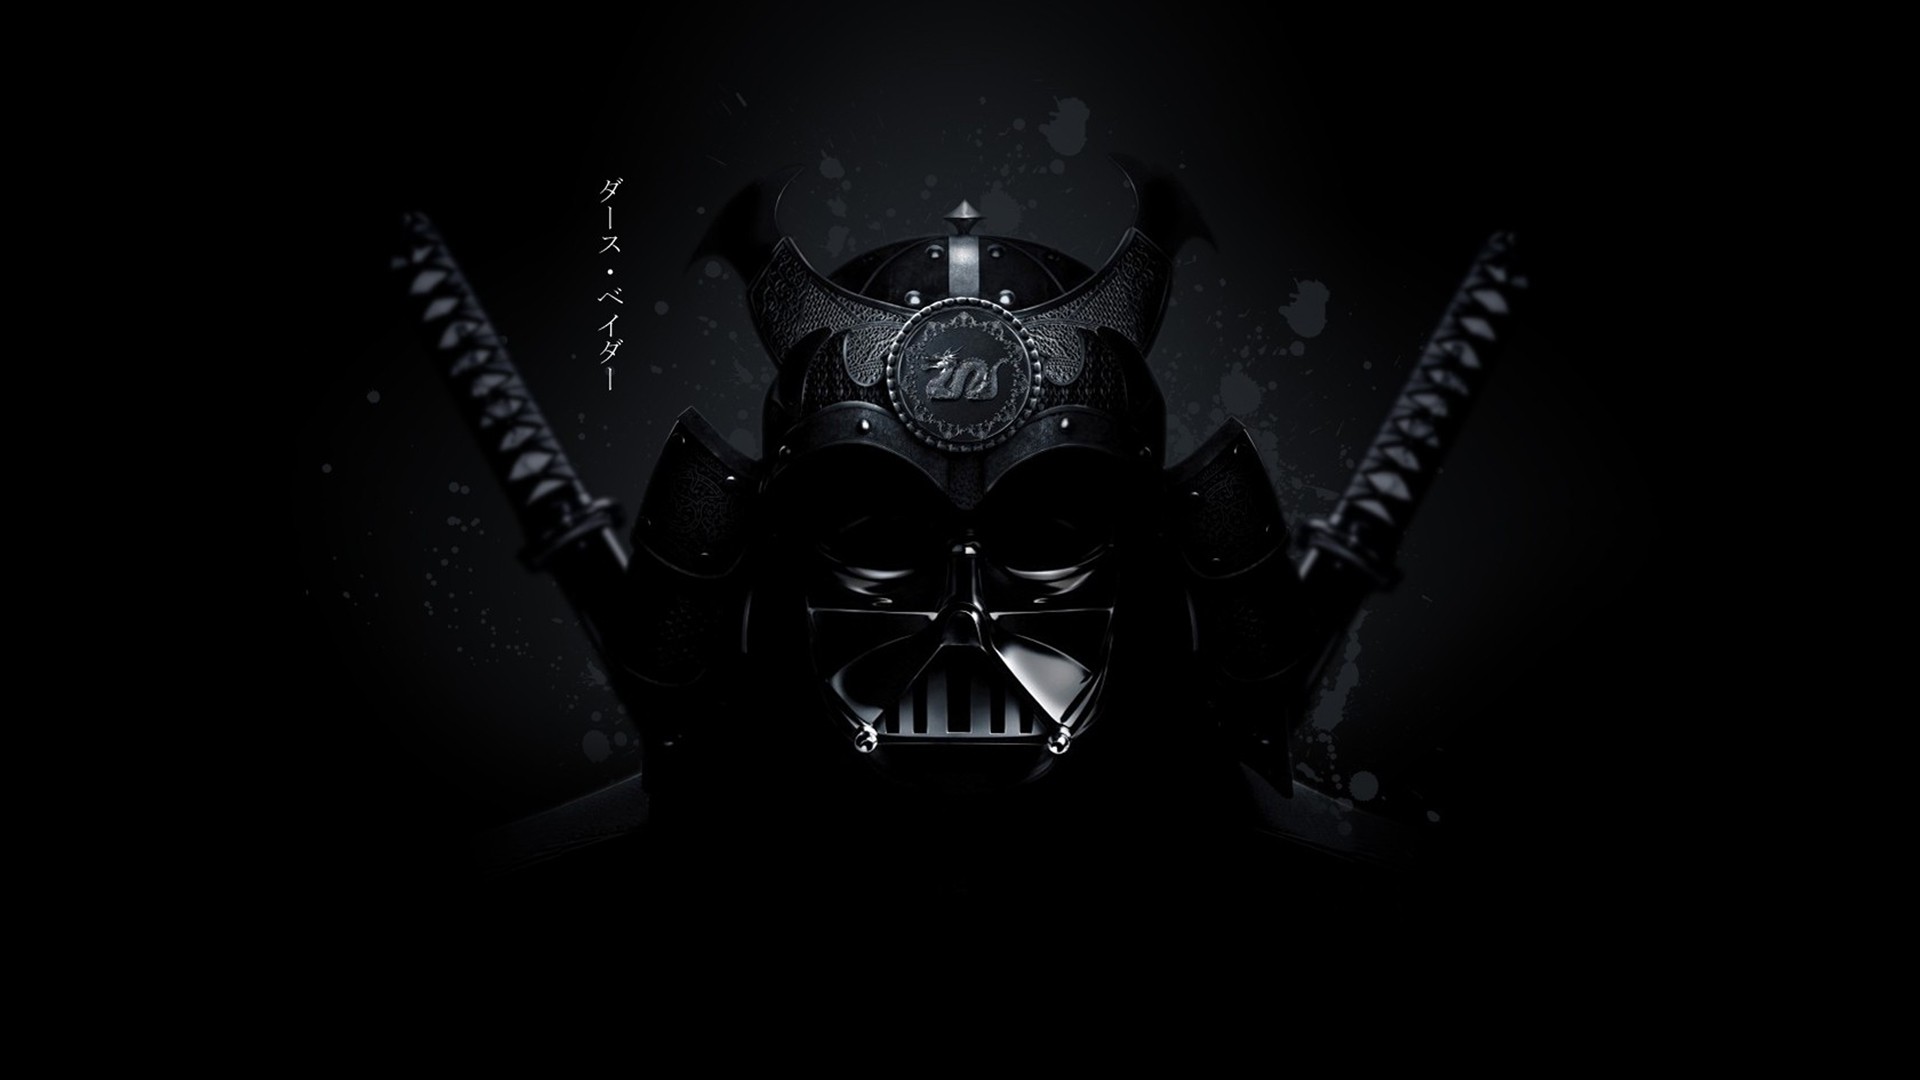 Awesome Star Wars Wallpaper